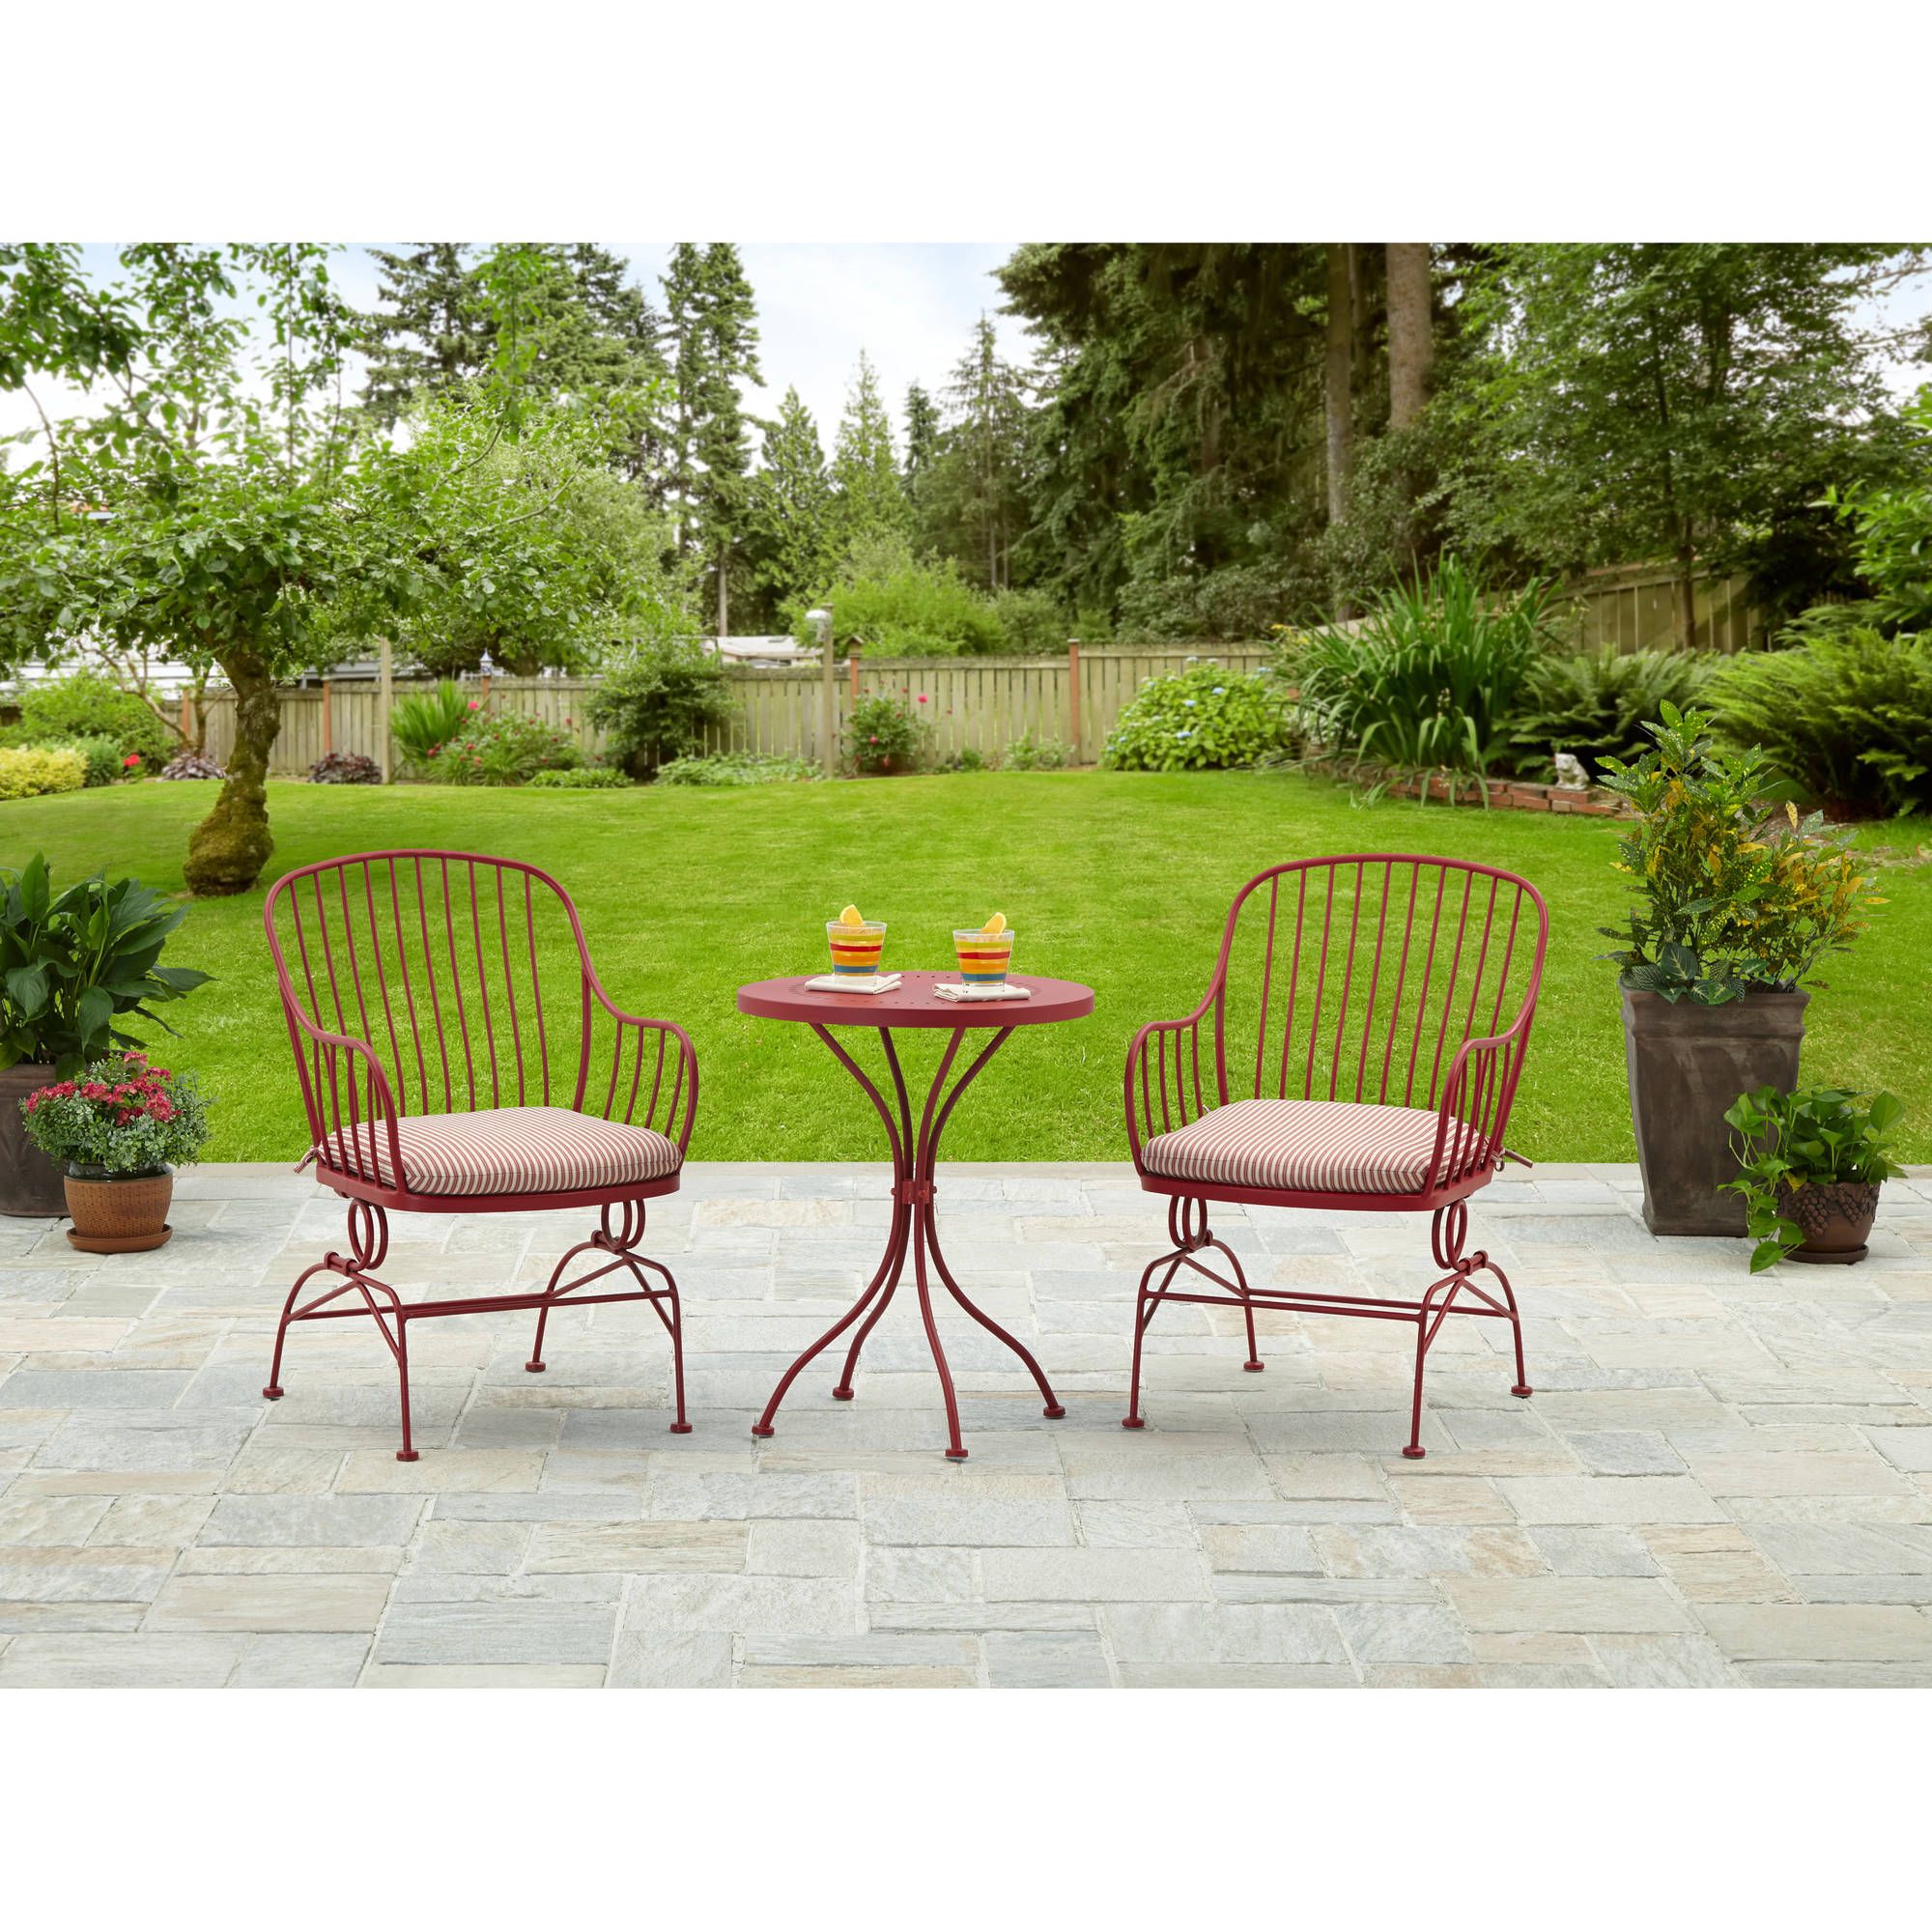 Modern Outdoor Furniture Sale Bistro Set 3 Piece Patio Table Sets Intended For Red Metal Outdoor Table And Chairs Sets (View 13 of 15)